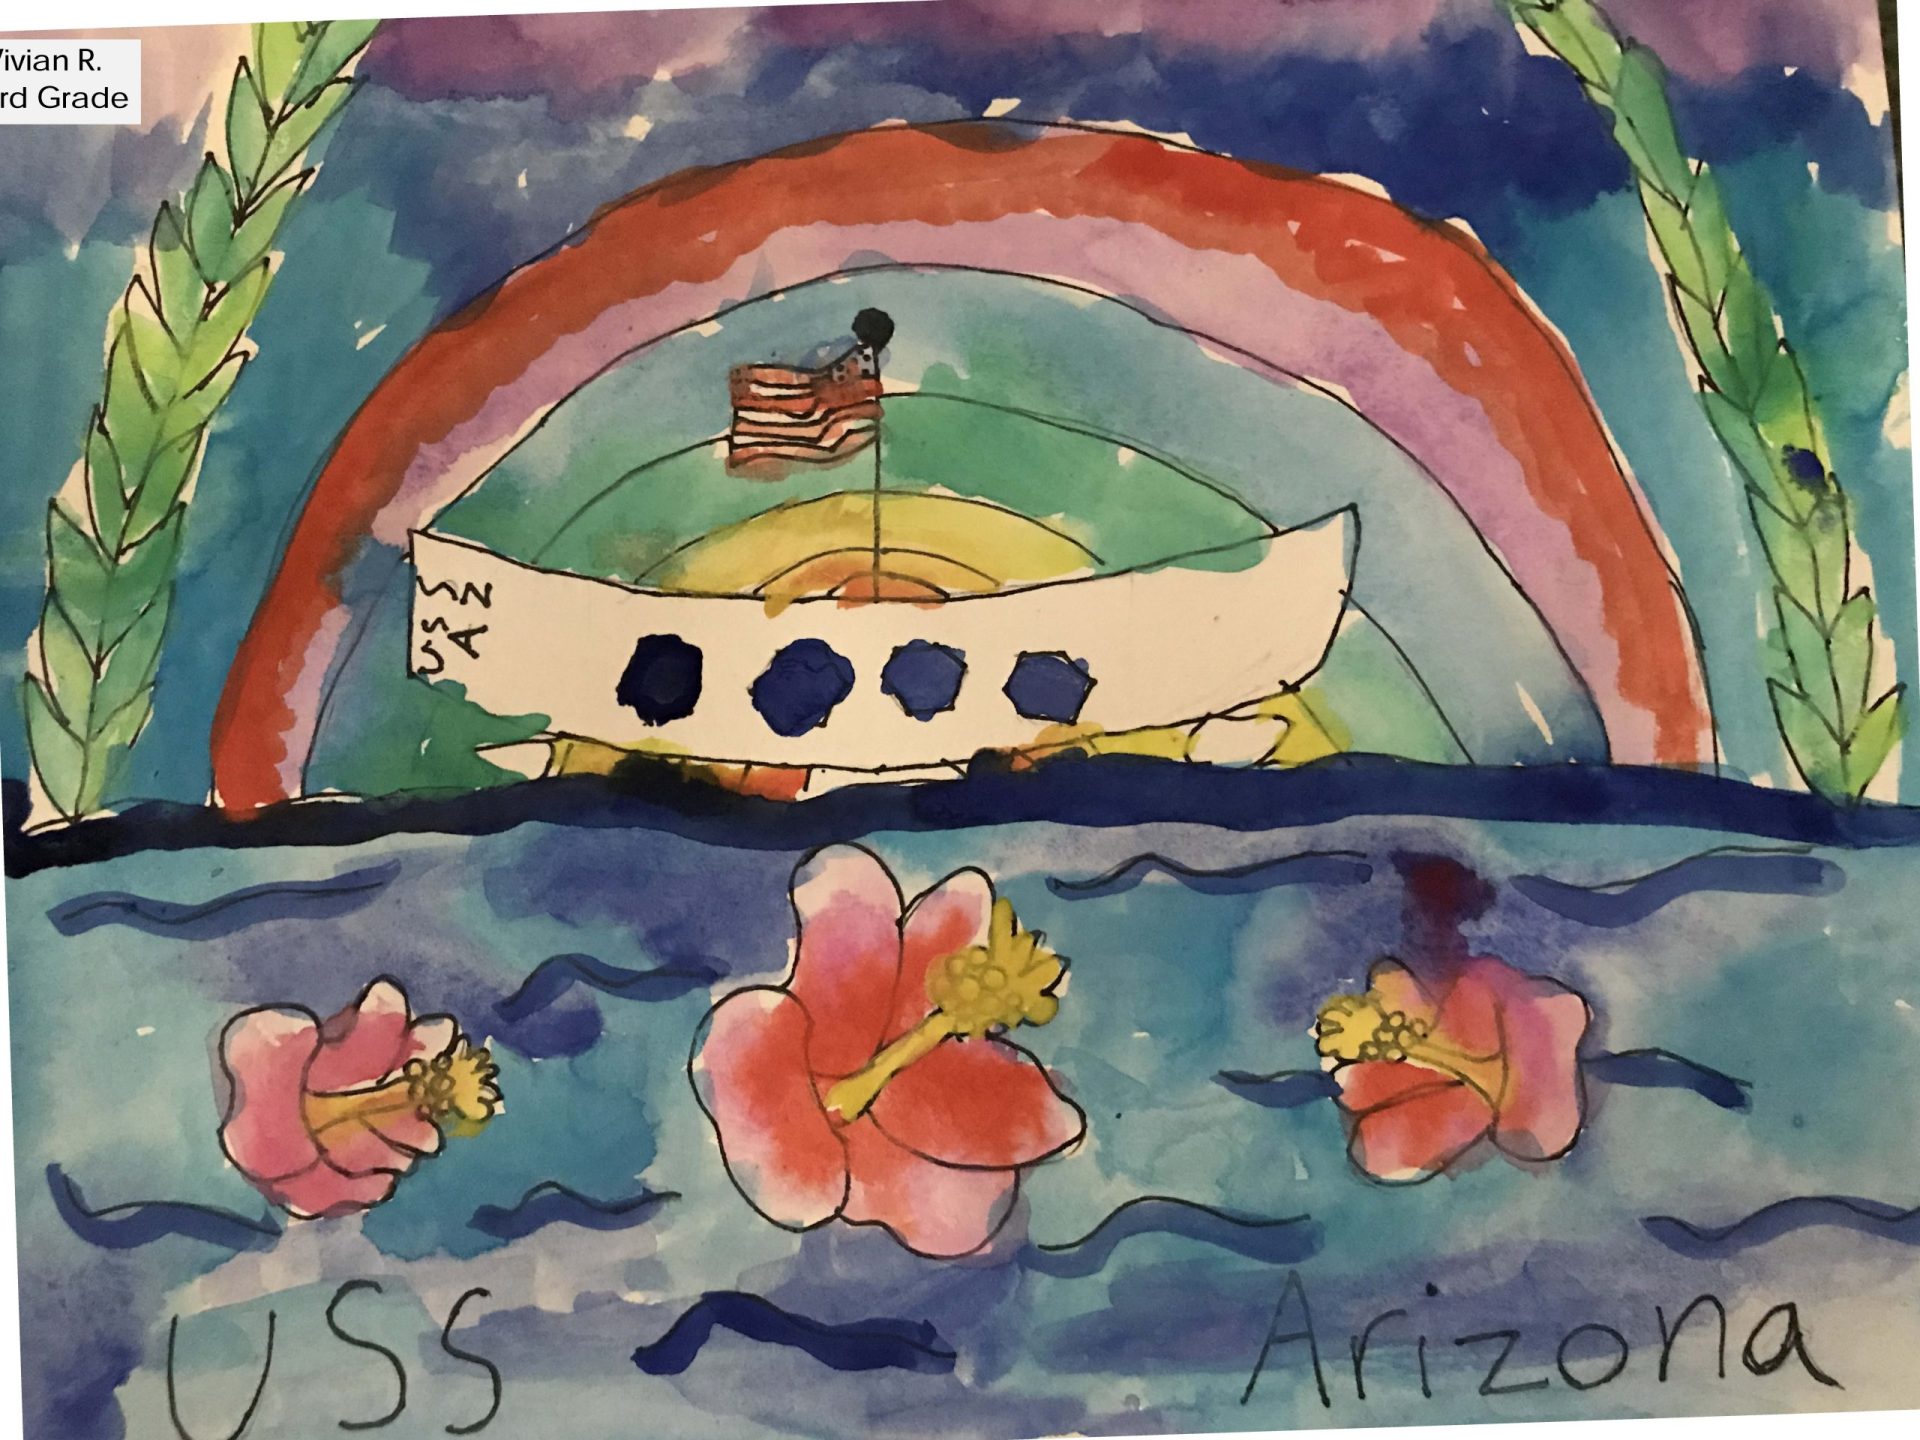 Pearl Harbor Remembrance Day Youth Art Contest Winners